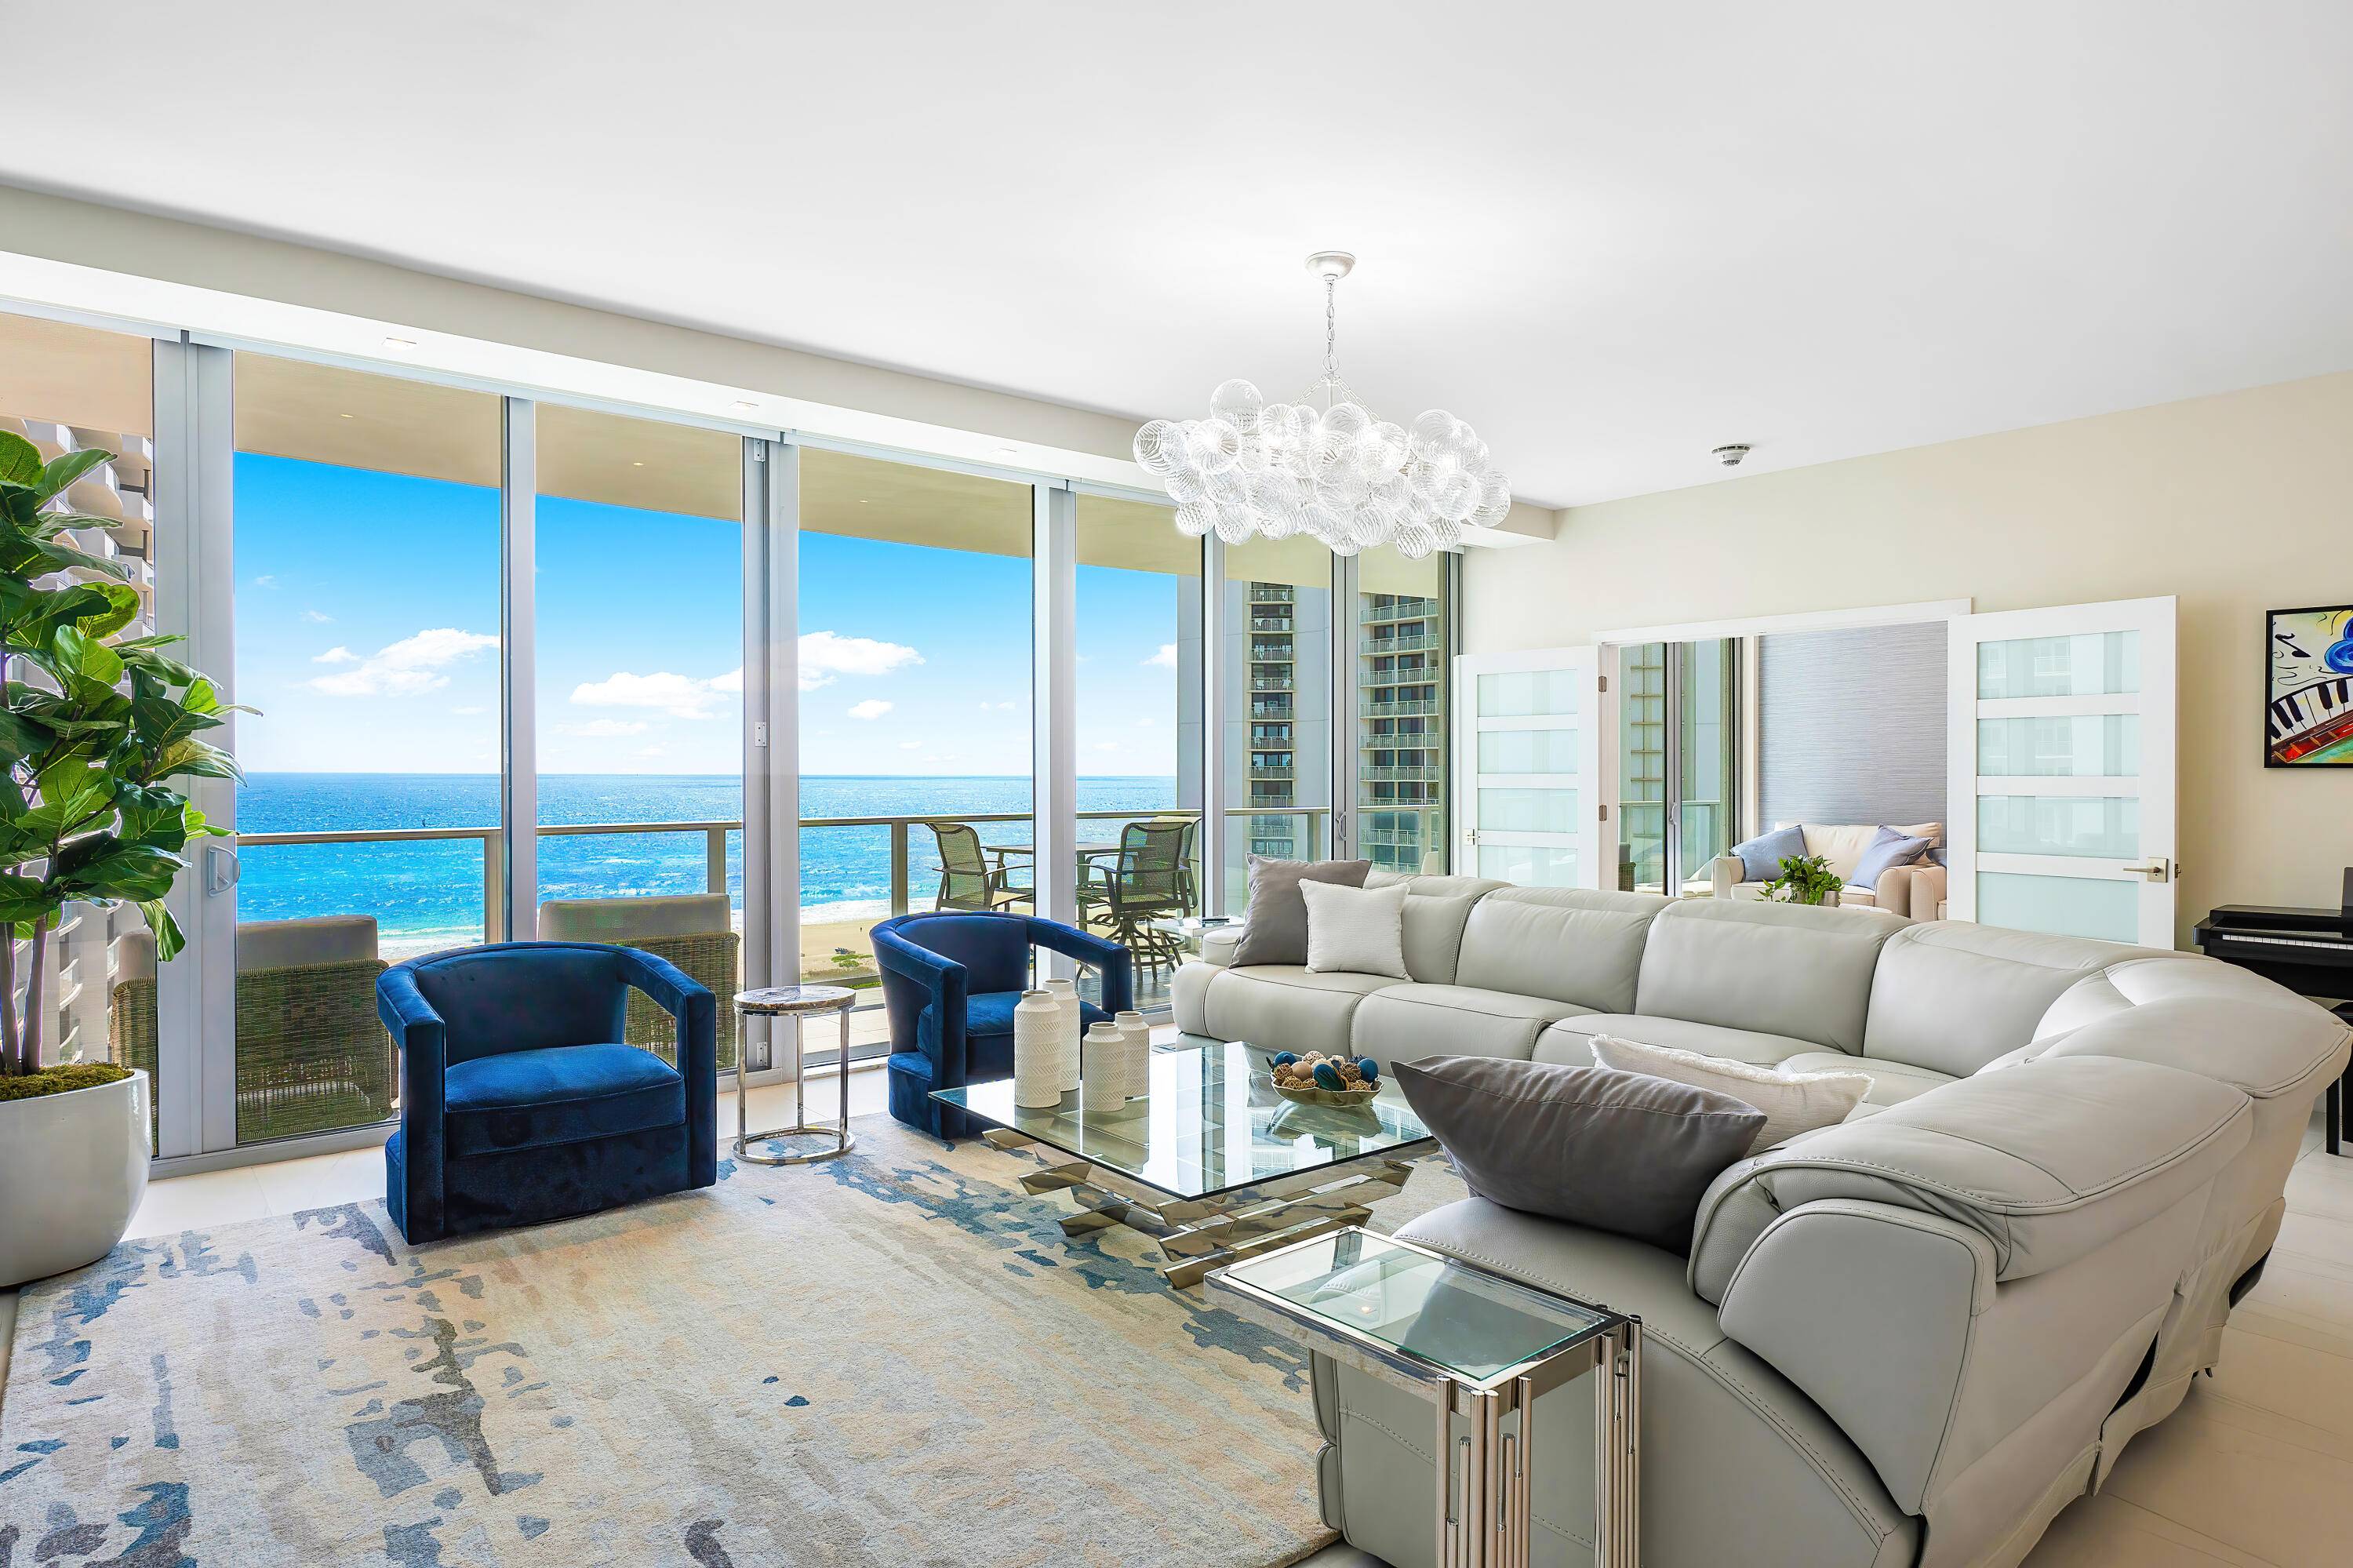 Wake up to unforgettable sunrises at this stunning oceanfront residence on Singer Island, where casual elegance meets unparalleled luxury living.